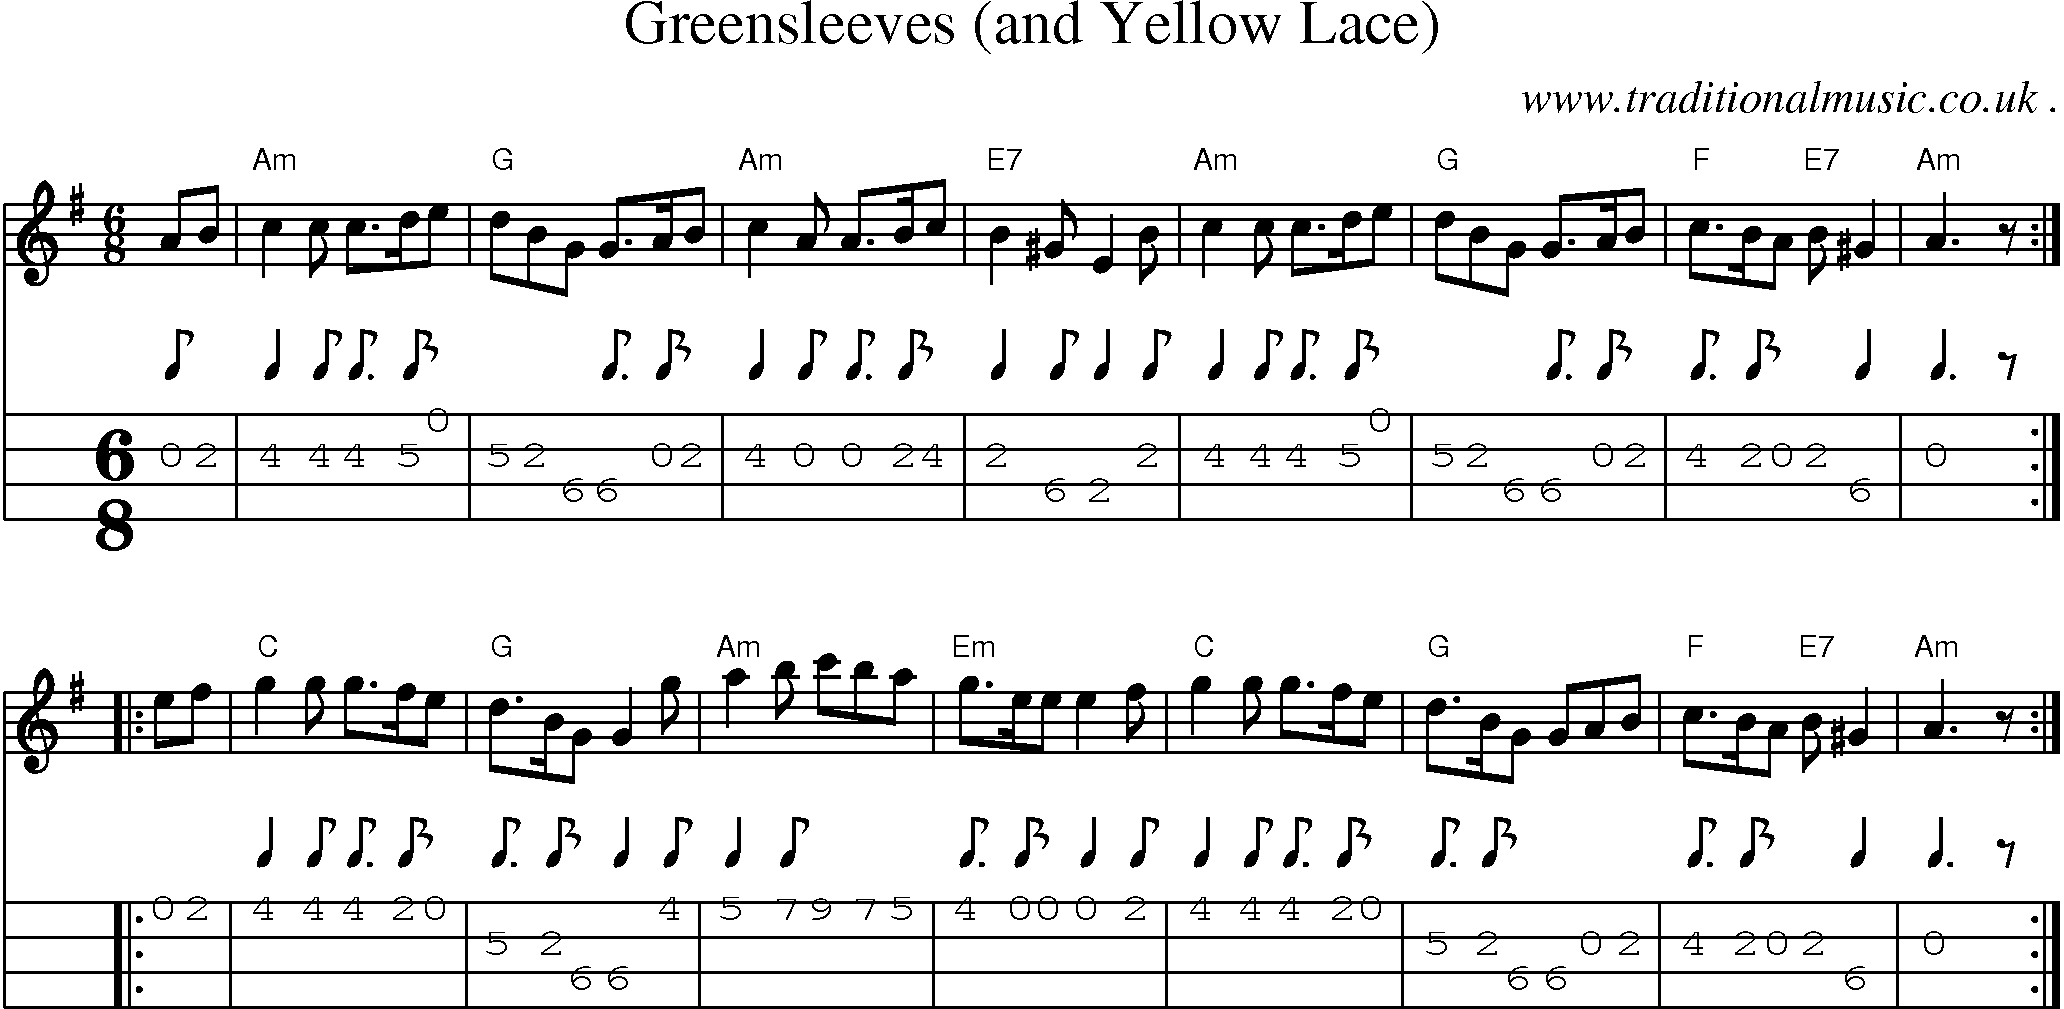 Sheet-music  score, Chords and Mandolin Tabs for Greensleeves And Yellow Lace